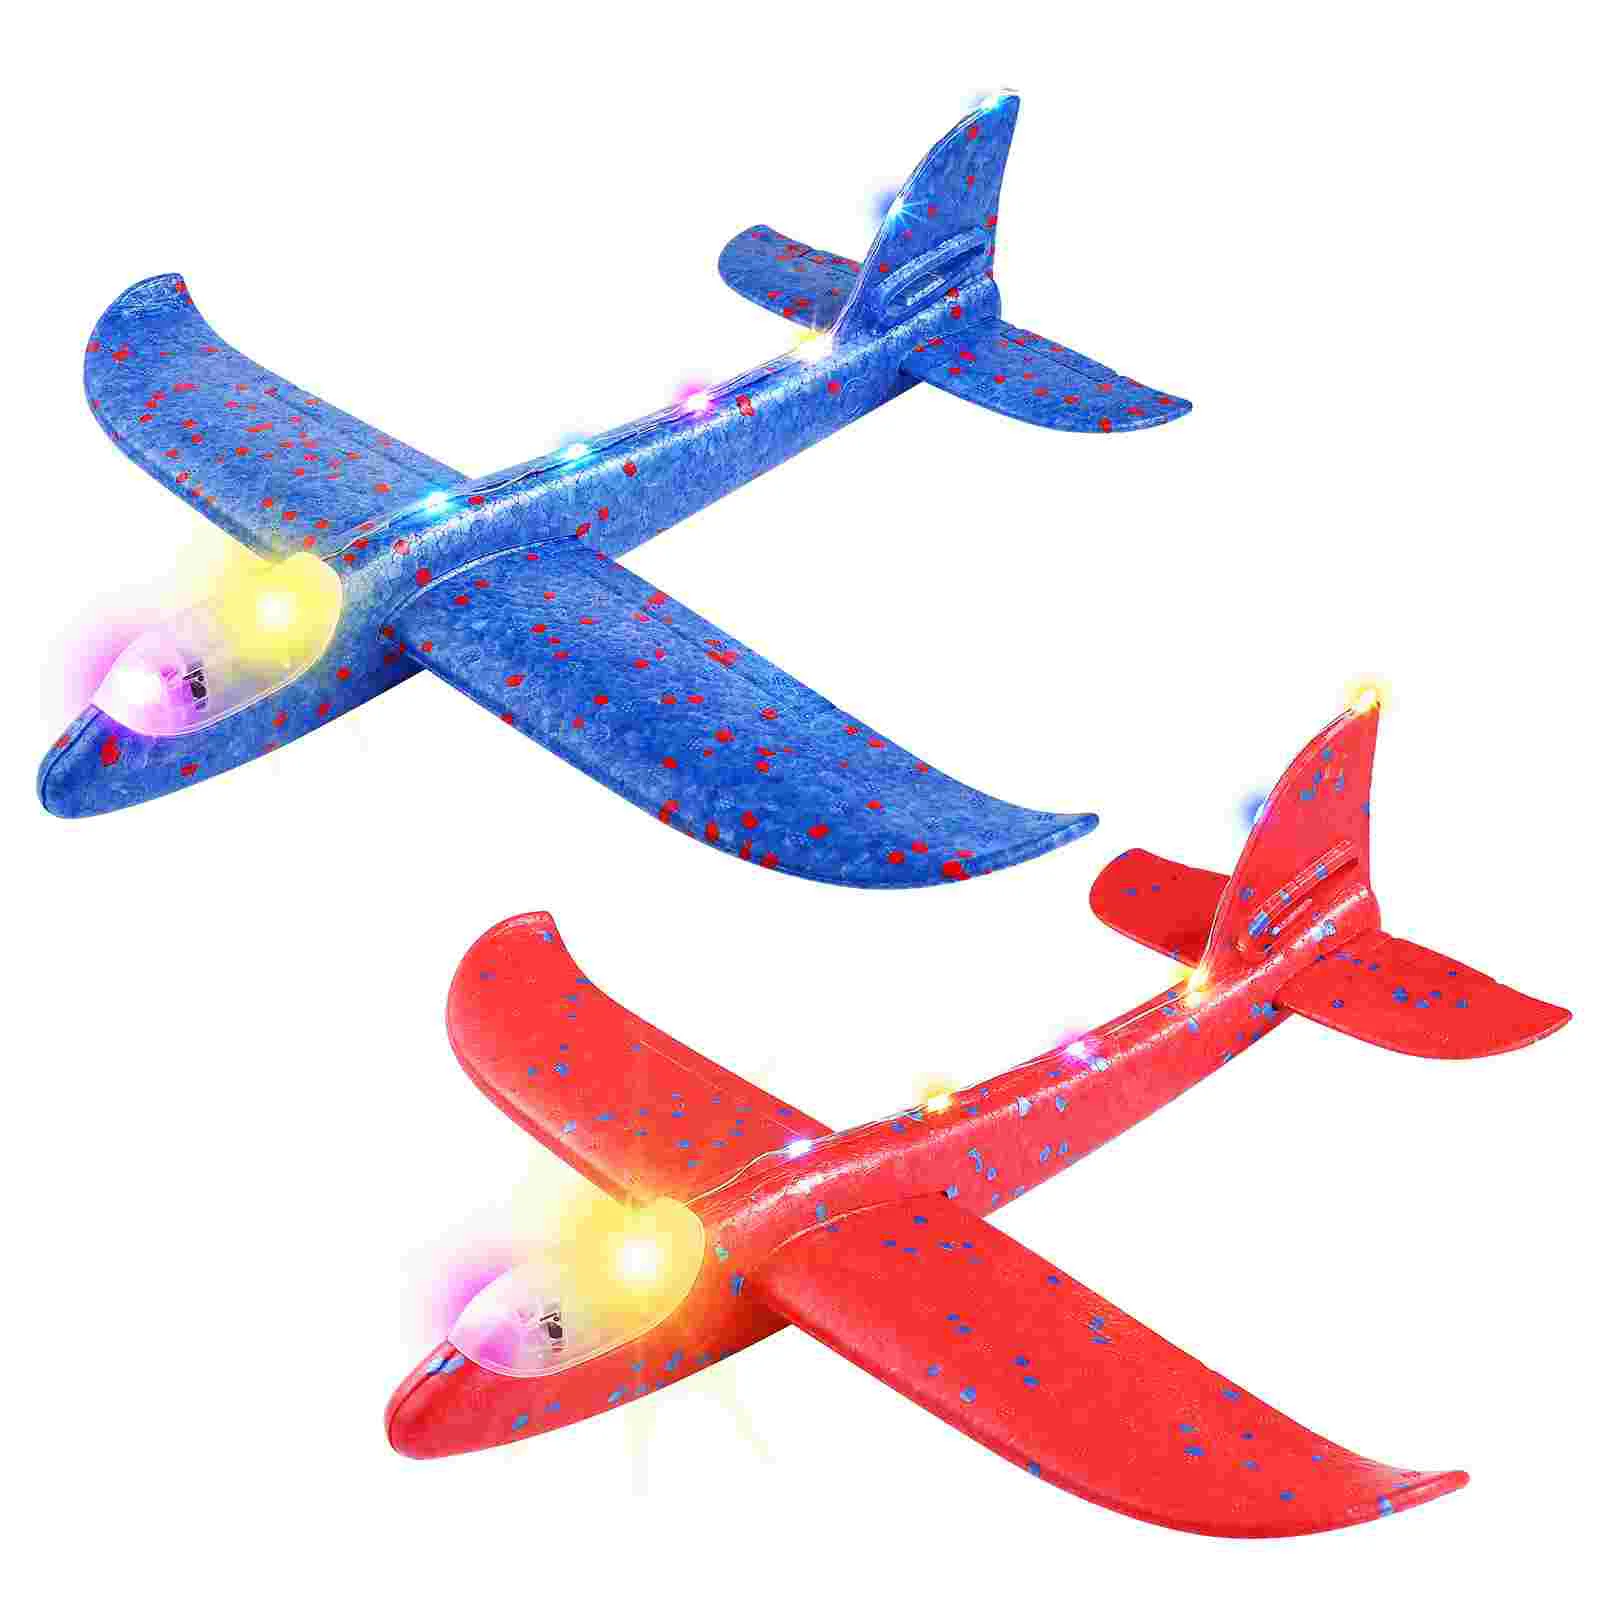 

STOBOK 2pcs Foam Airplane Toys Kids Glider Planes LED Light Up Throwing Foam Airplanes Outdoor Flying Toys